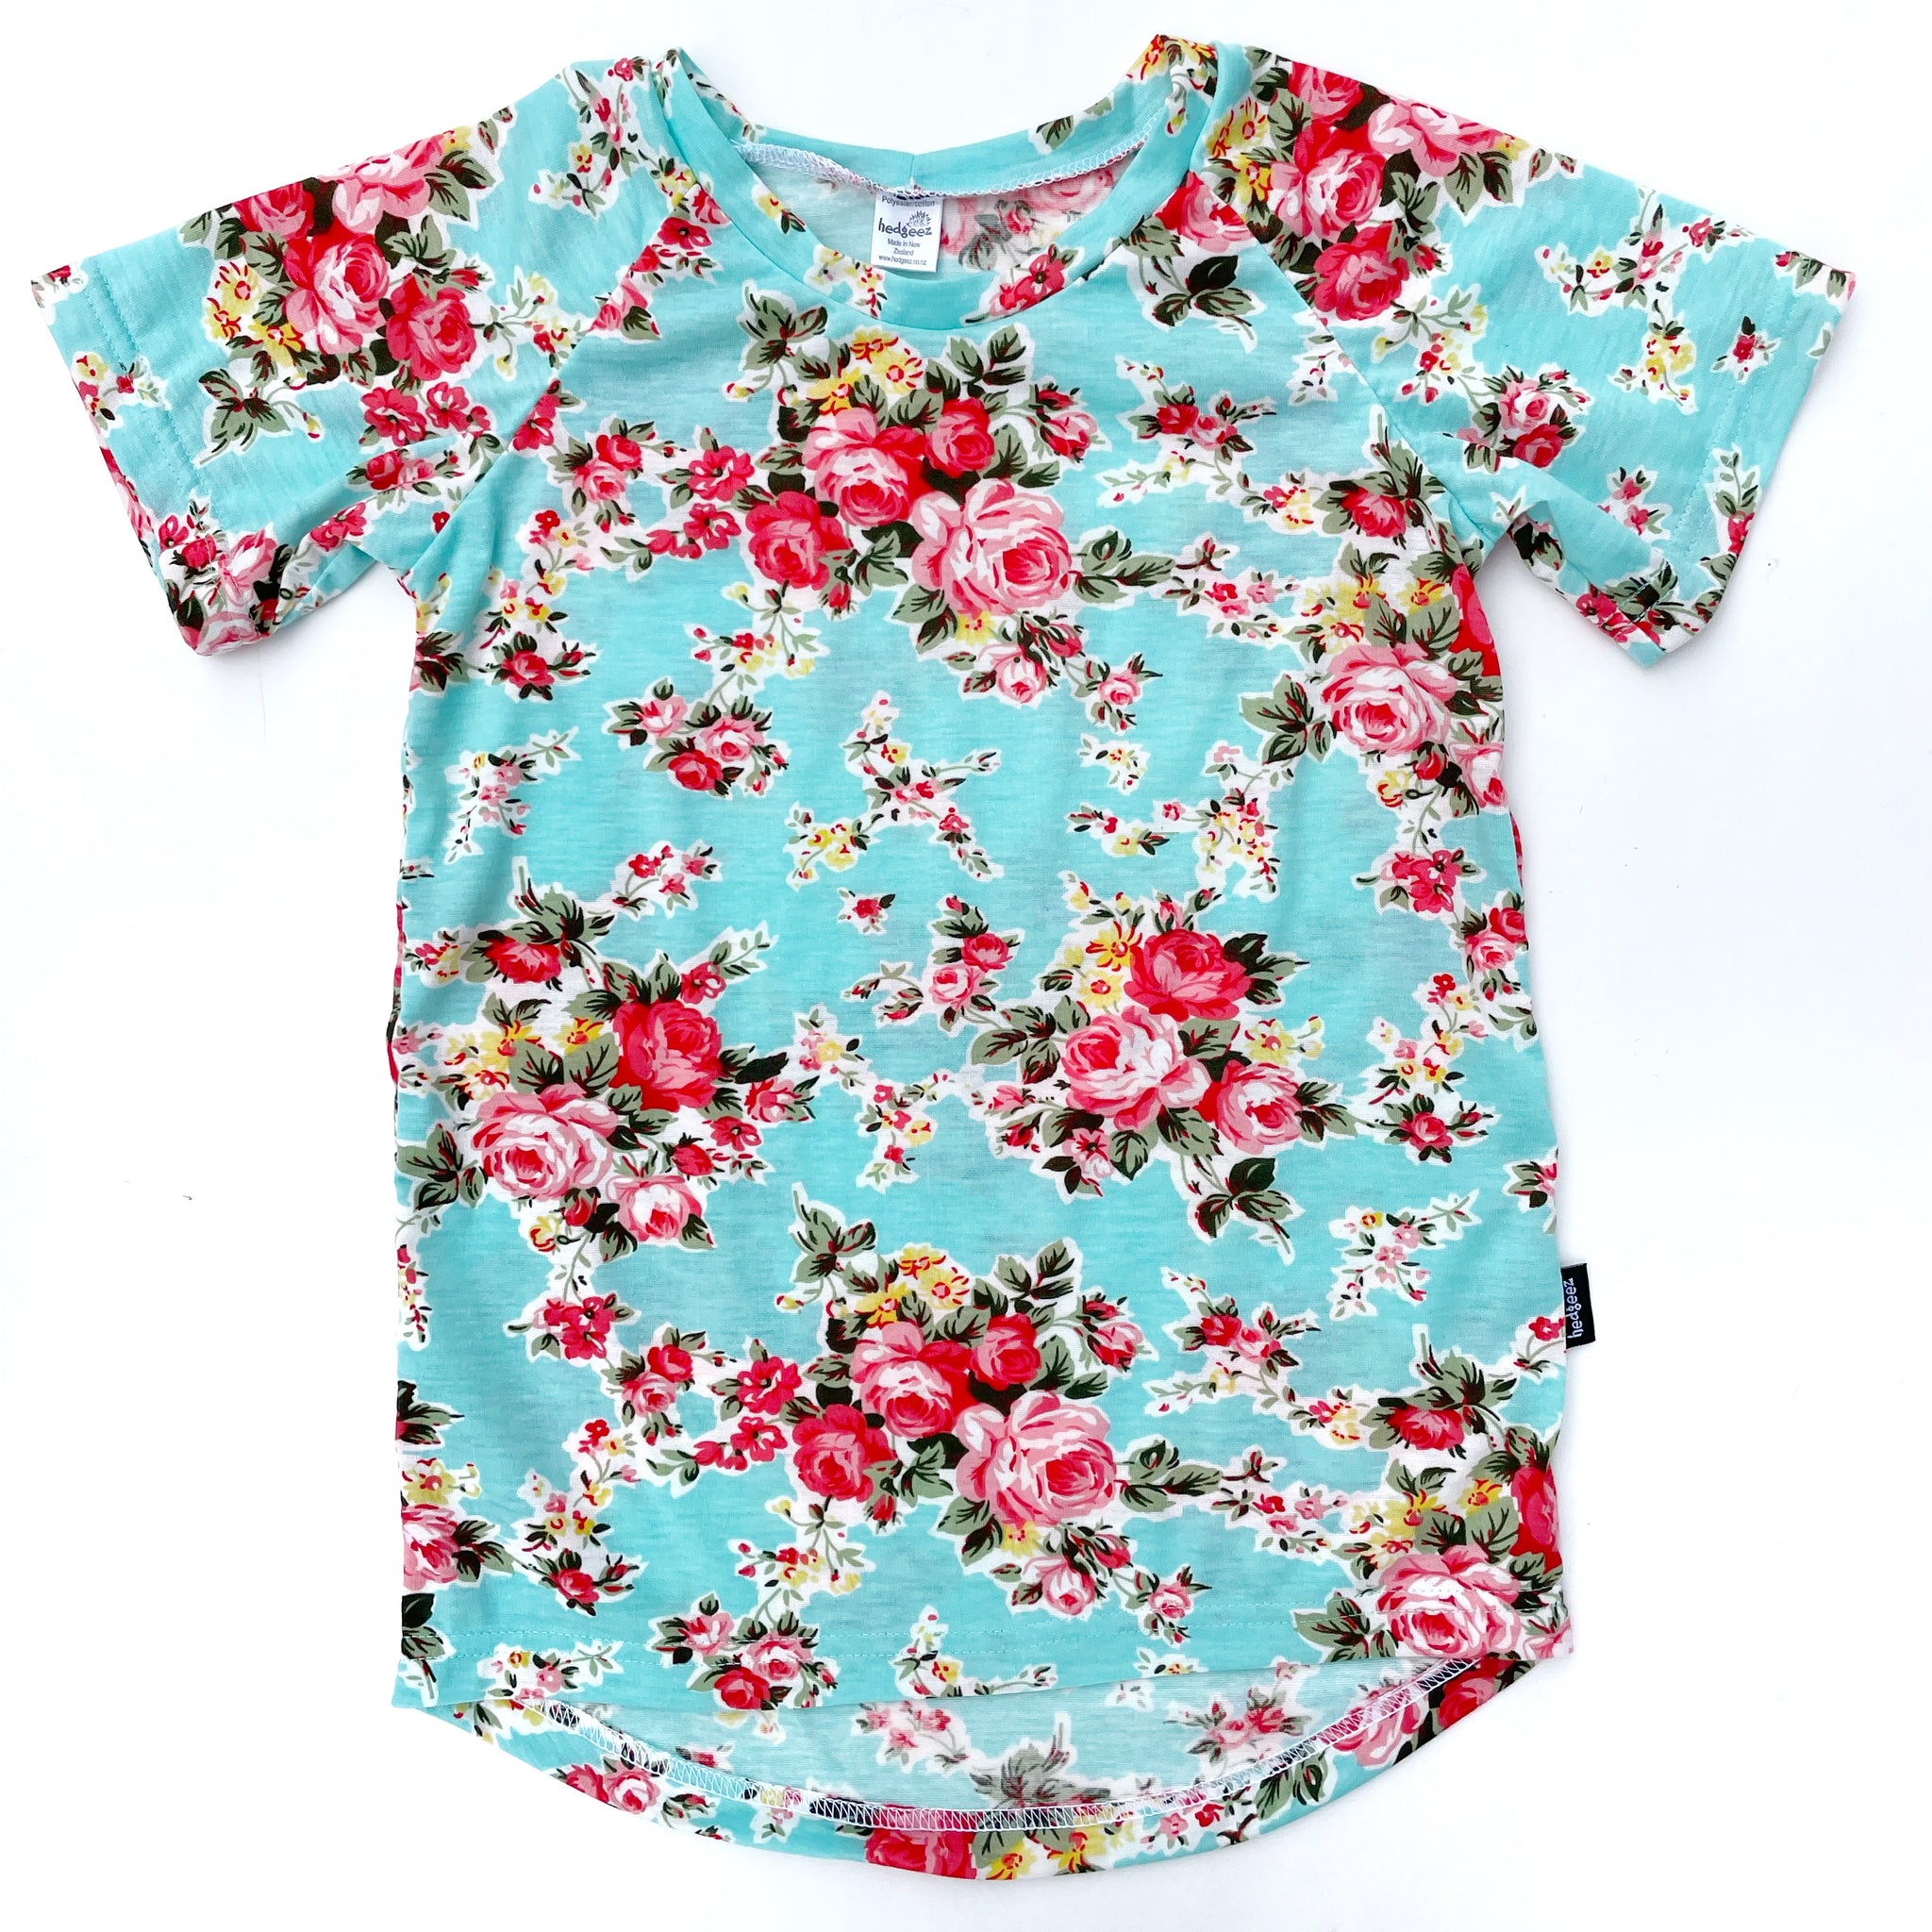 T-Shirt - Teal Floral - Size 3